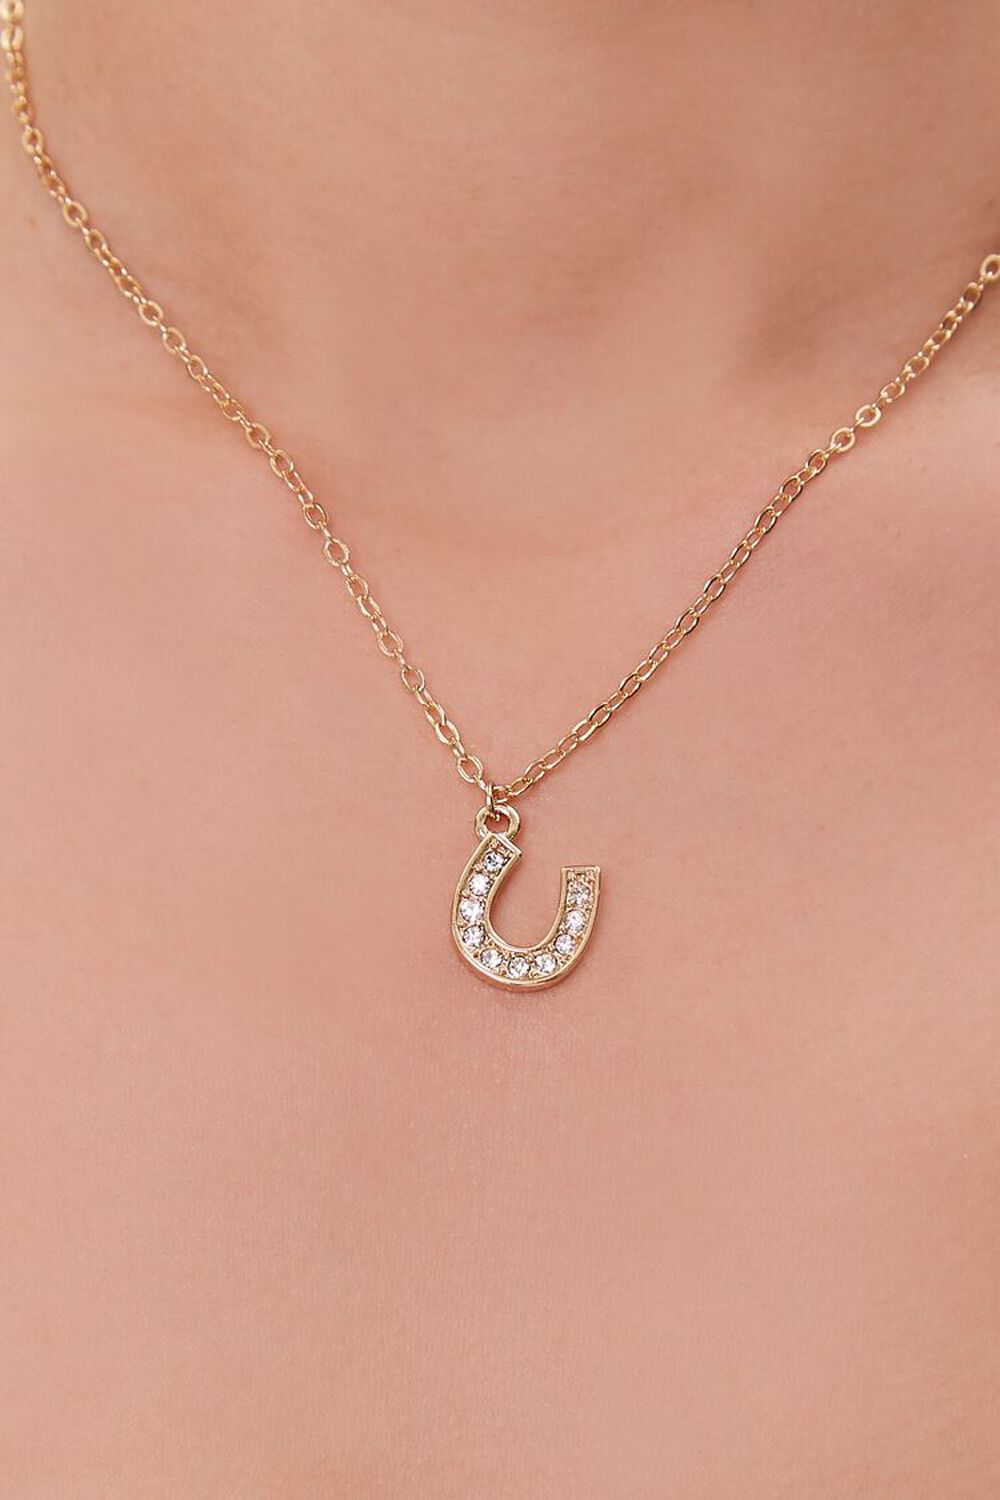 GOLD/CLEAR Horse Shoe Charm Necklace, image 1